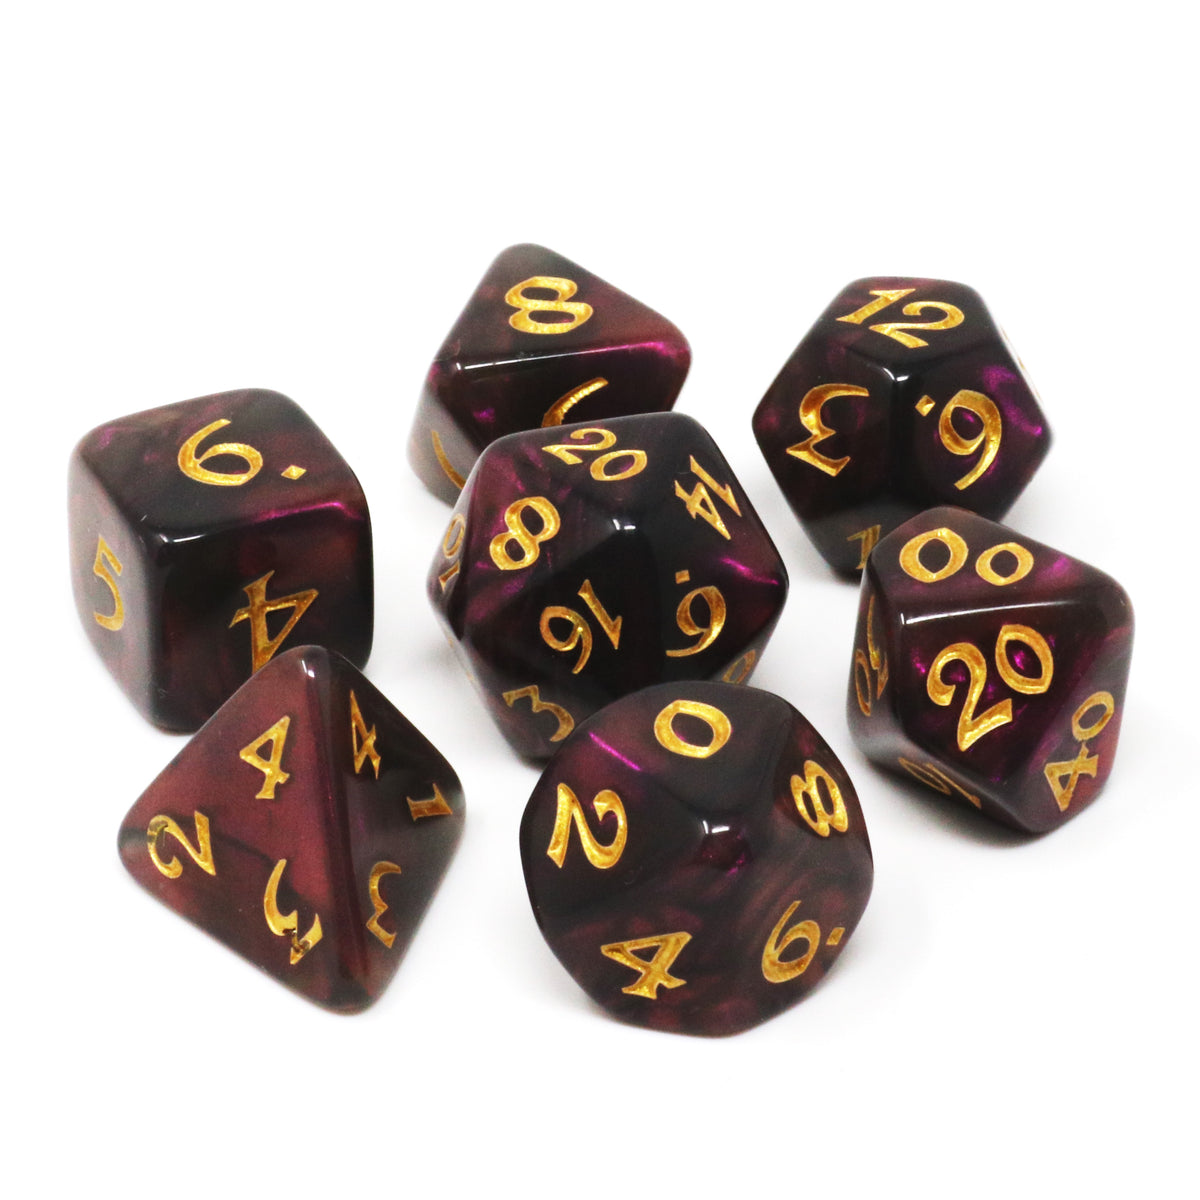 7pc RPG Set - Elessia Moonstone Inkswell with Gold